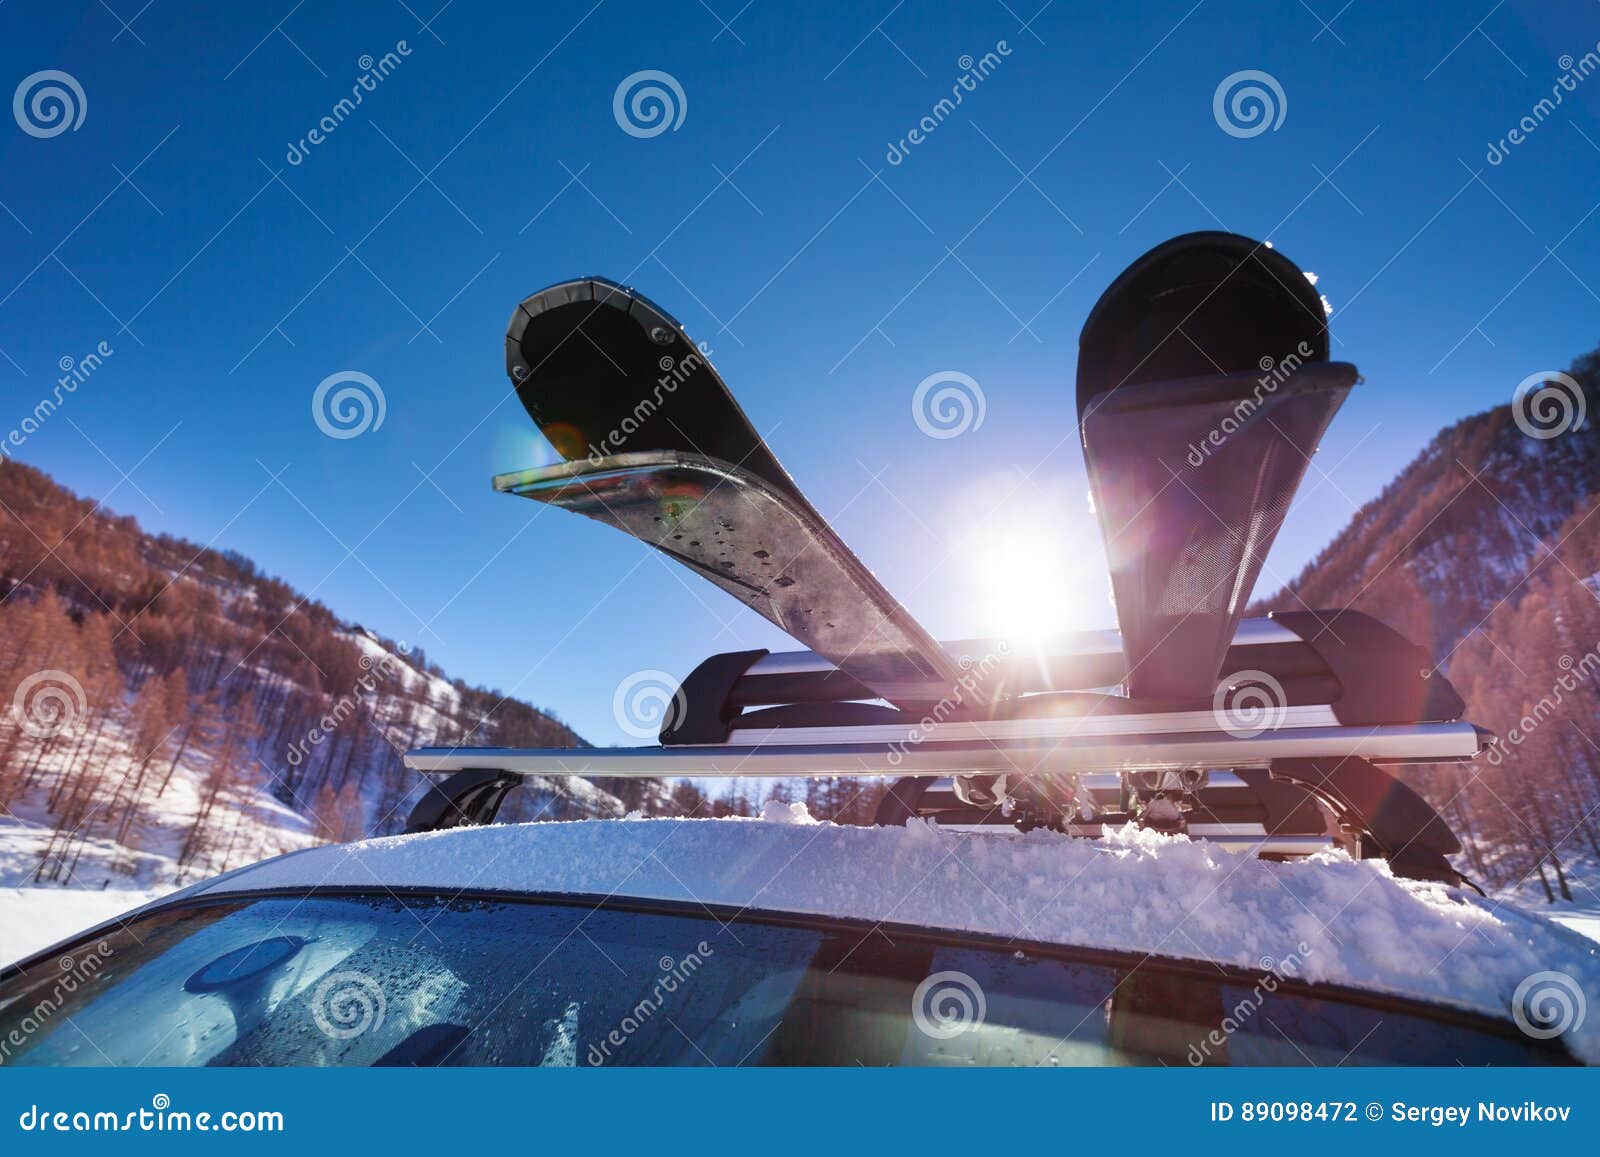 car roof with two pairs of skis on the rack